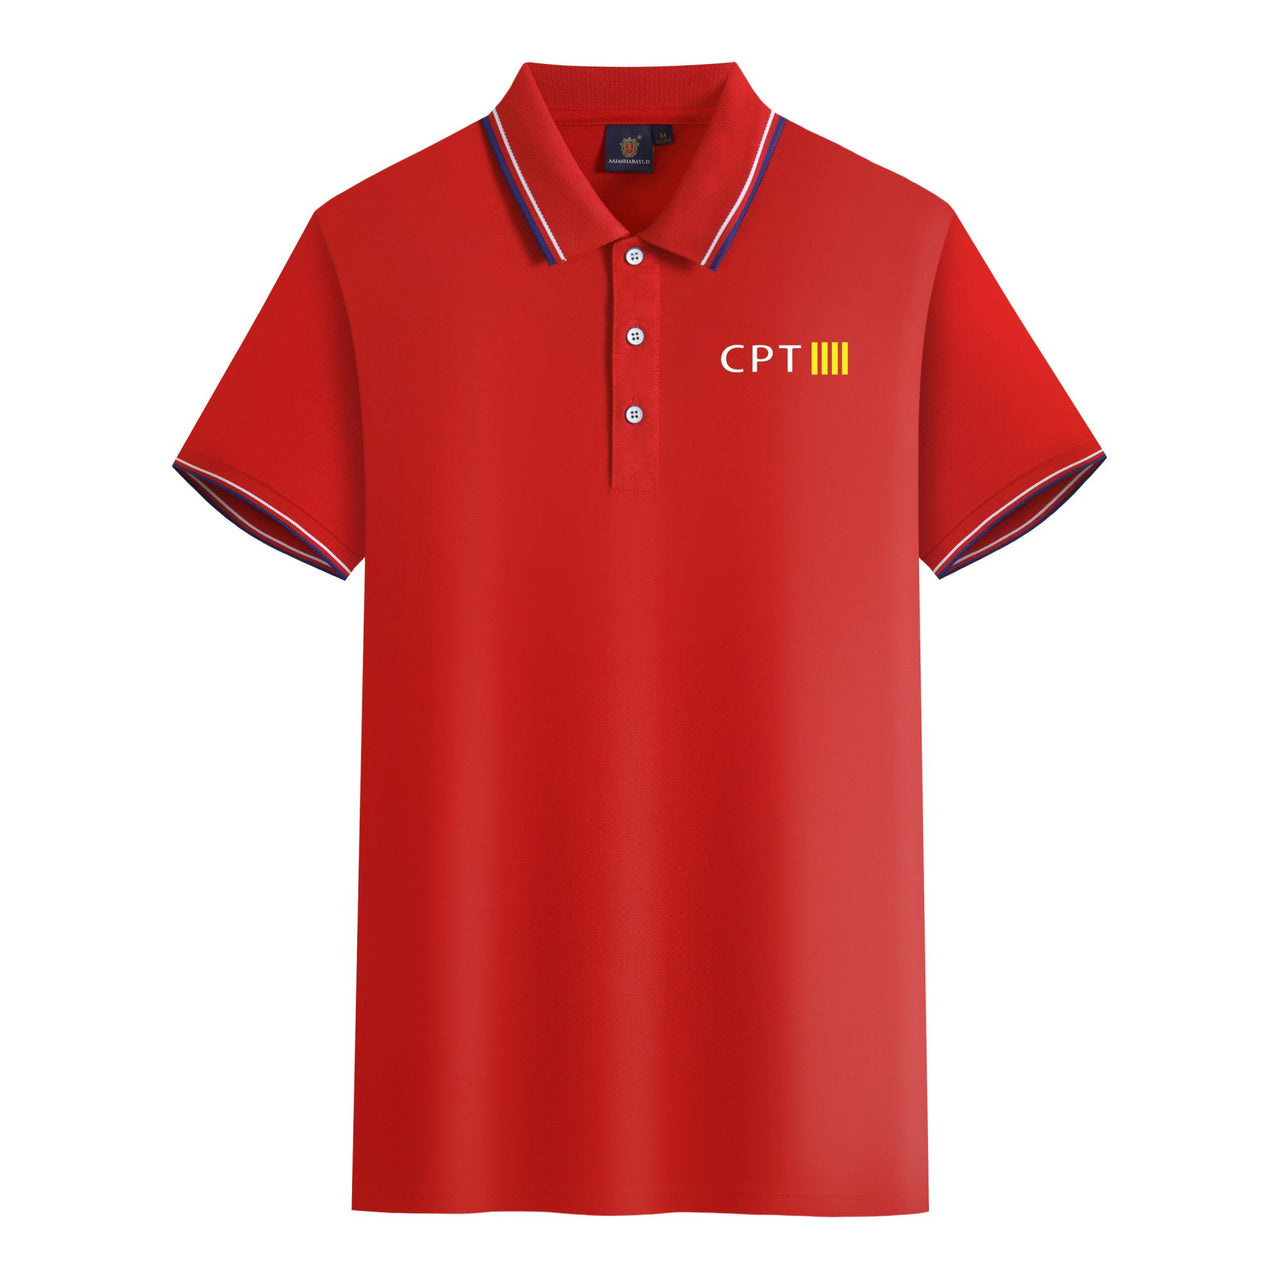 CPT & 4 Lines Designed Stylish Polo T-Shirts